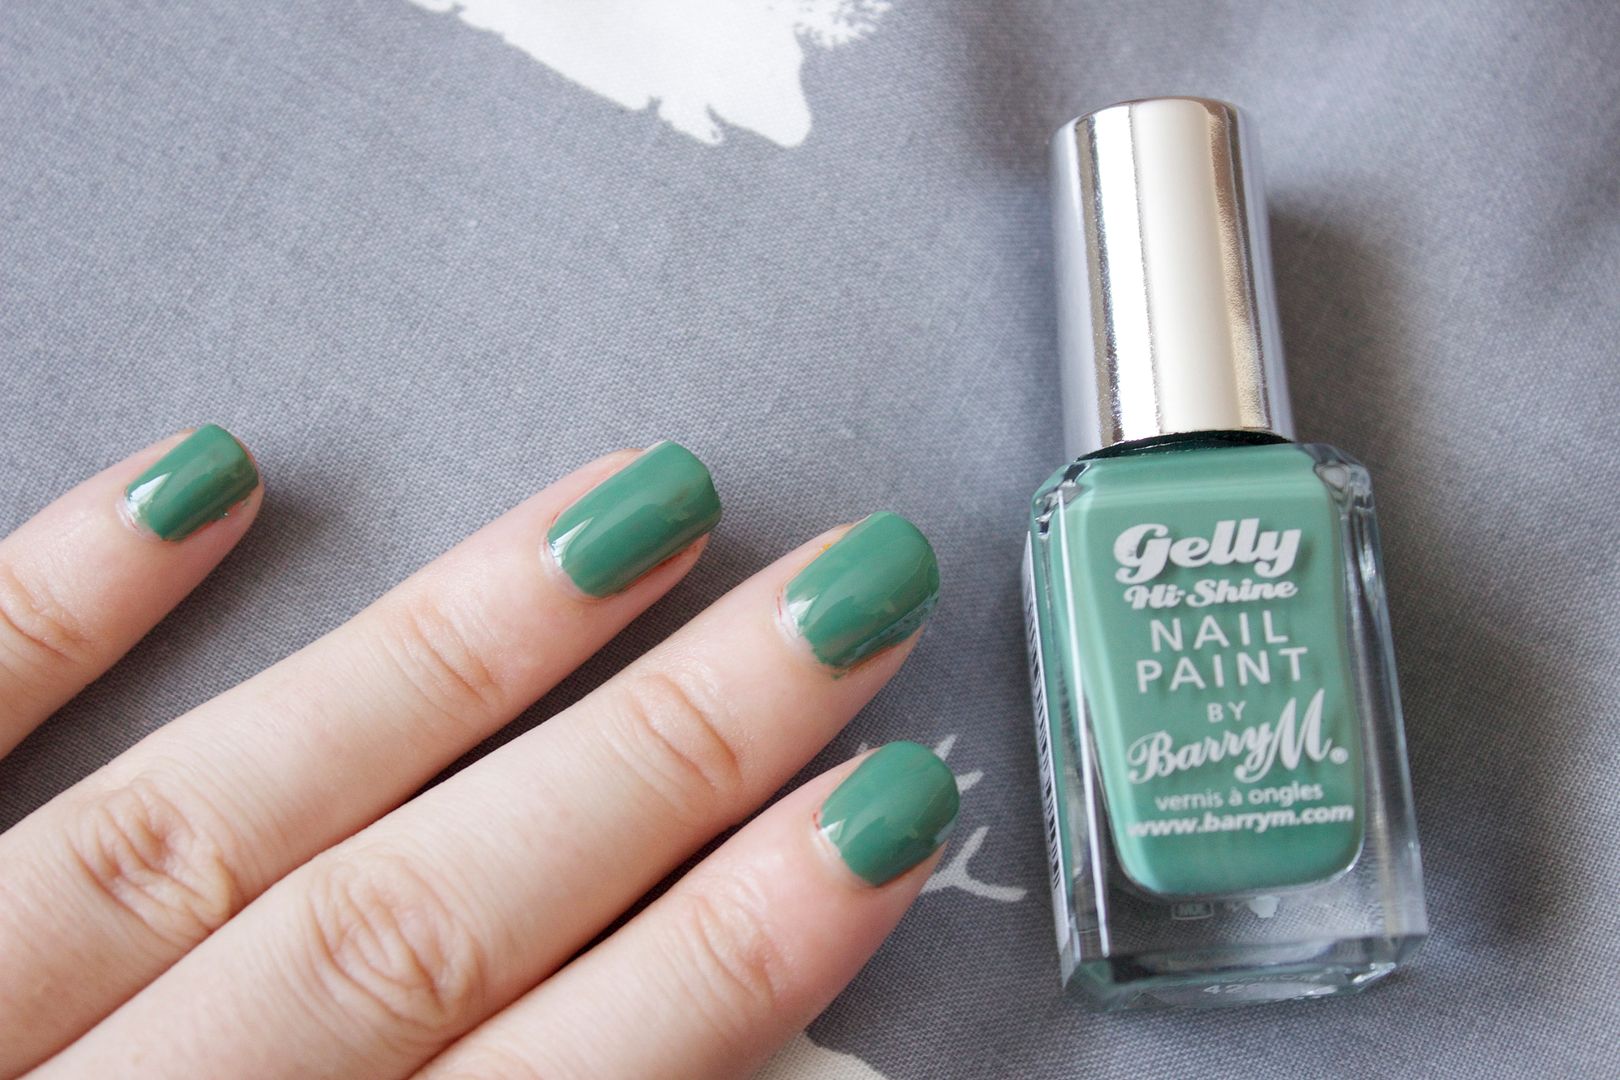 Barry M Autumn/Winter 2014 Gelly Nail Paint in Cardamom